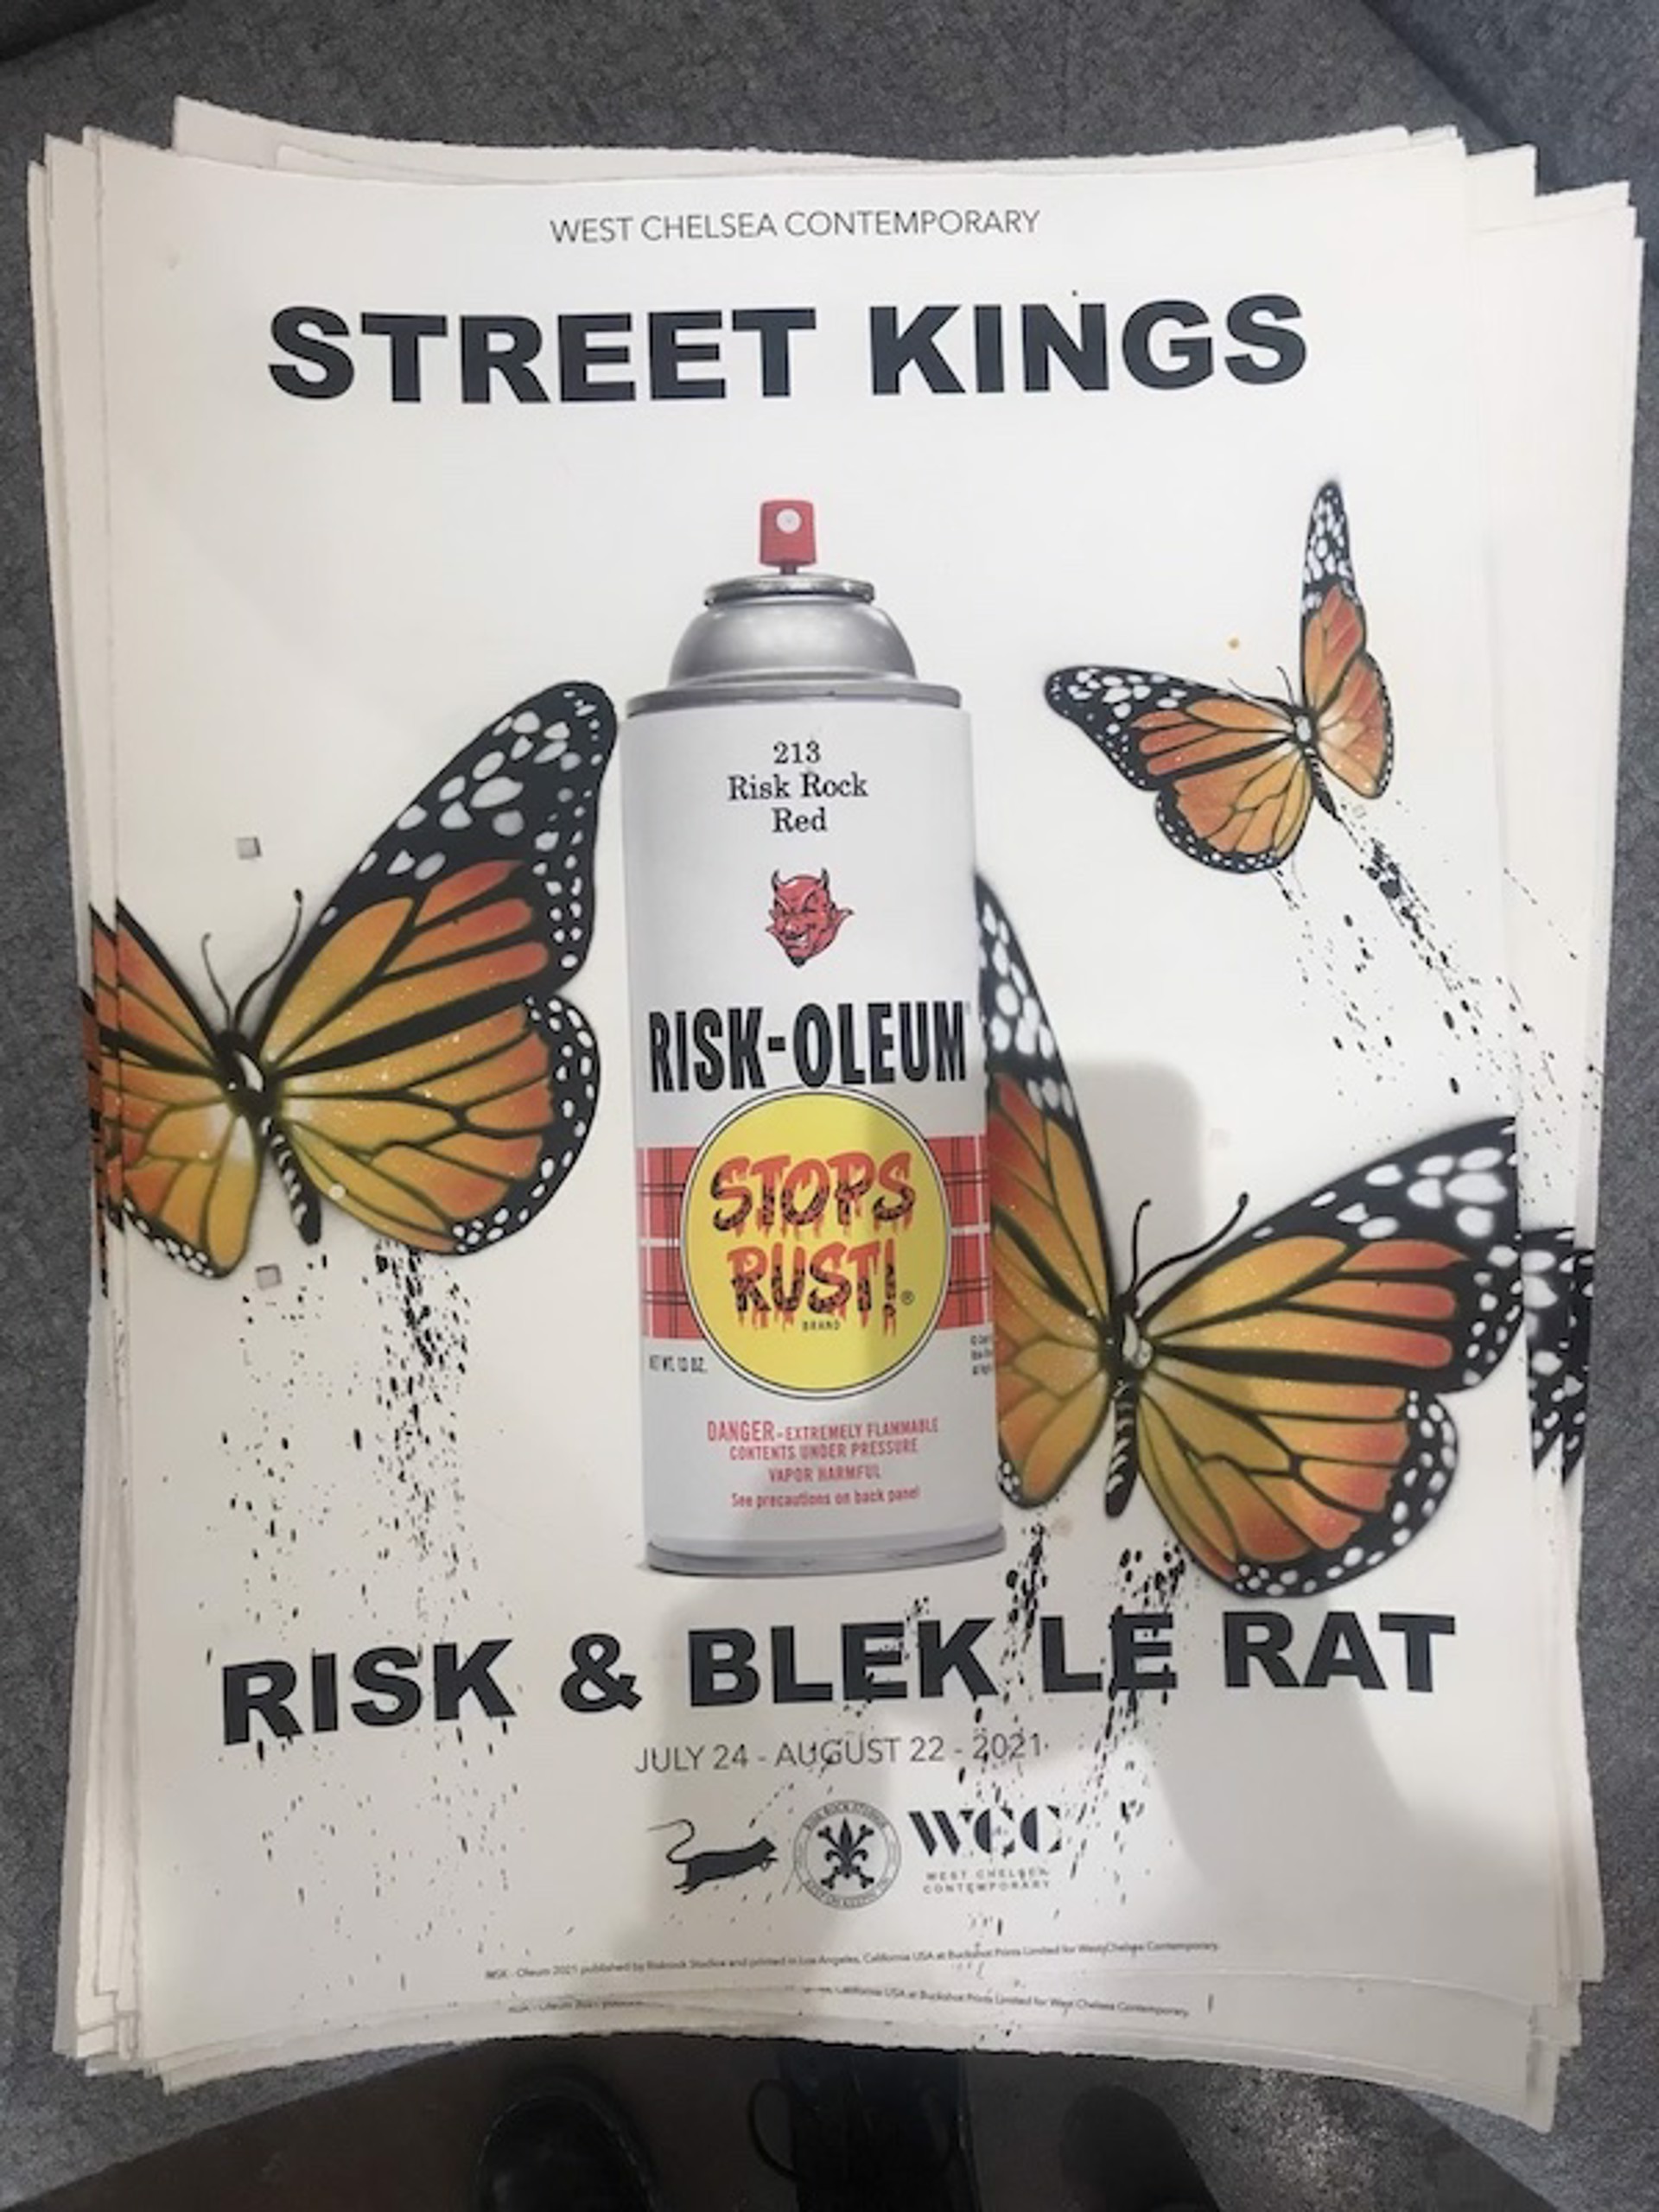 Street Kings Show Print (44/50) by Risk